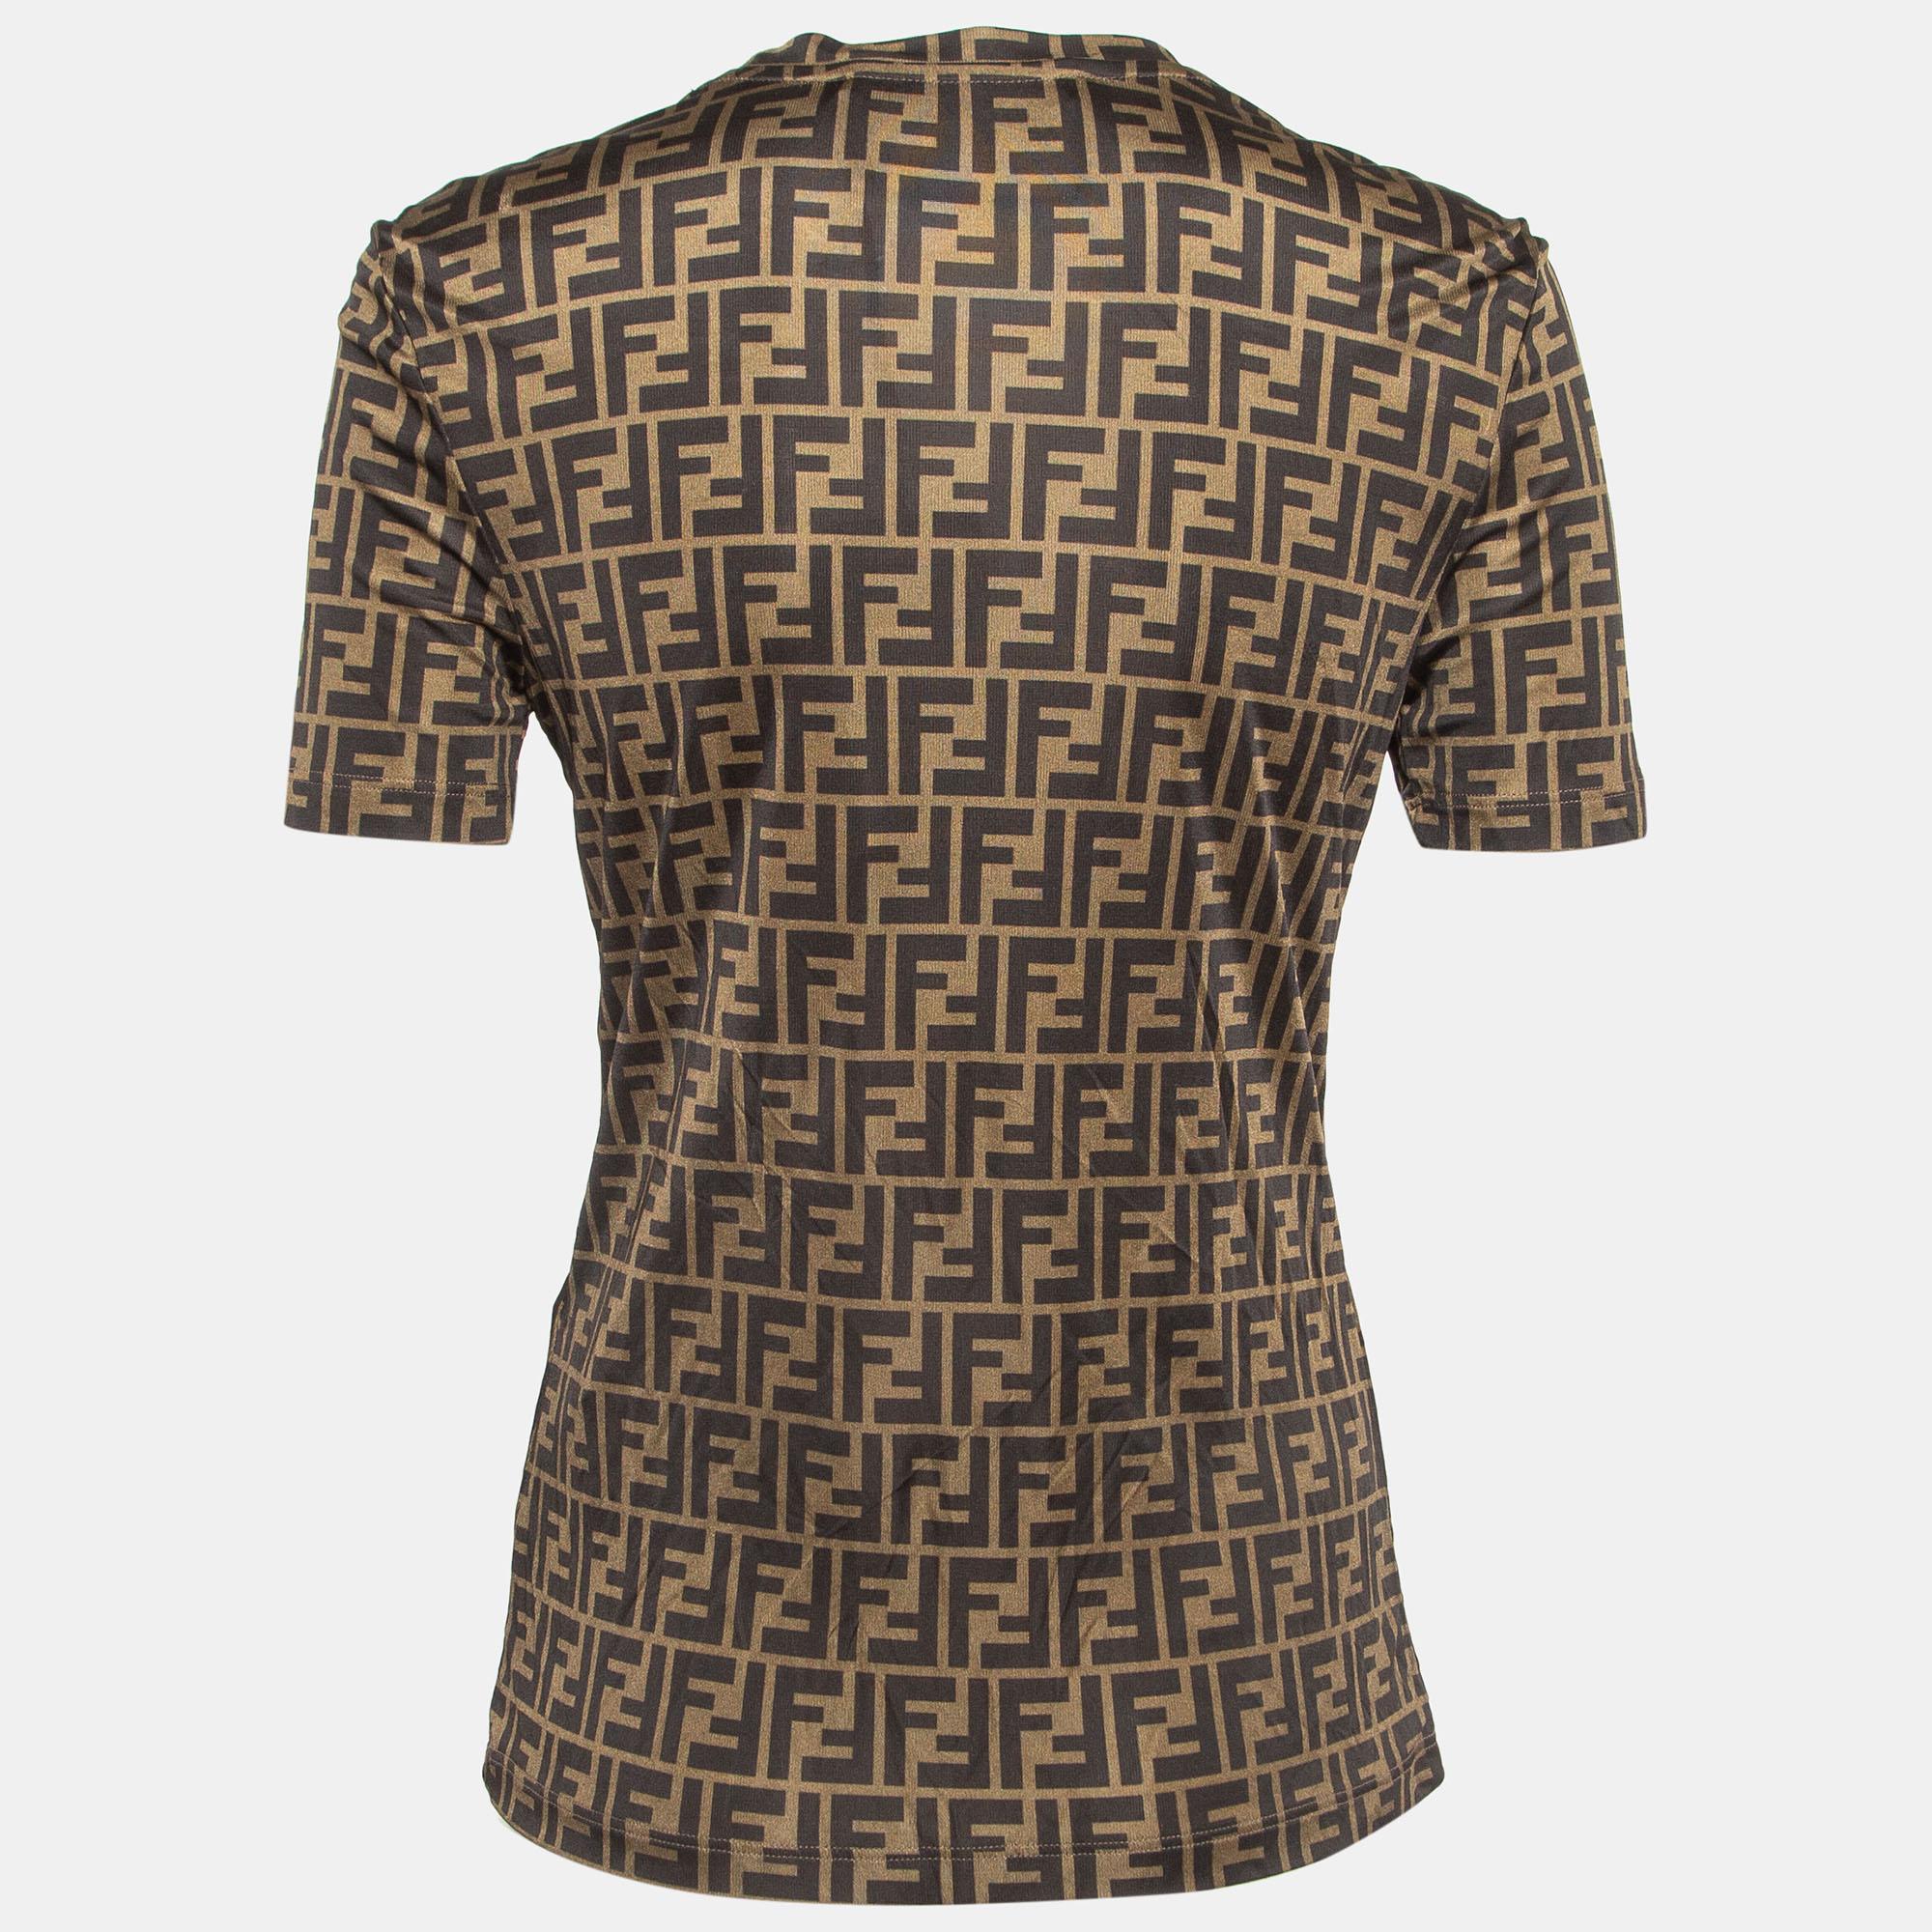 Immerse yourself in luxury with the Fendi x Versace t-shirt. Crafted with exquisite attention to detail, this opulent garment features a rich brown monogram pattern accented by sparkling crystal embellishments, effortlessly blending style and